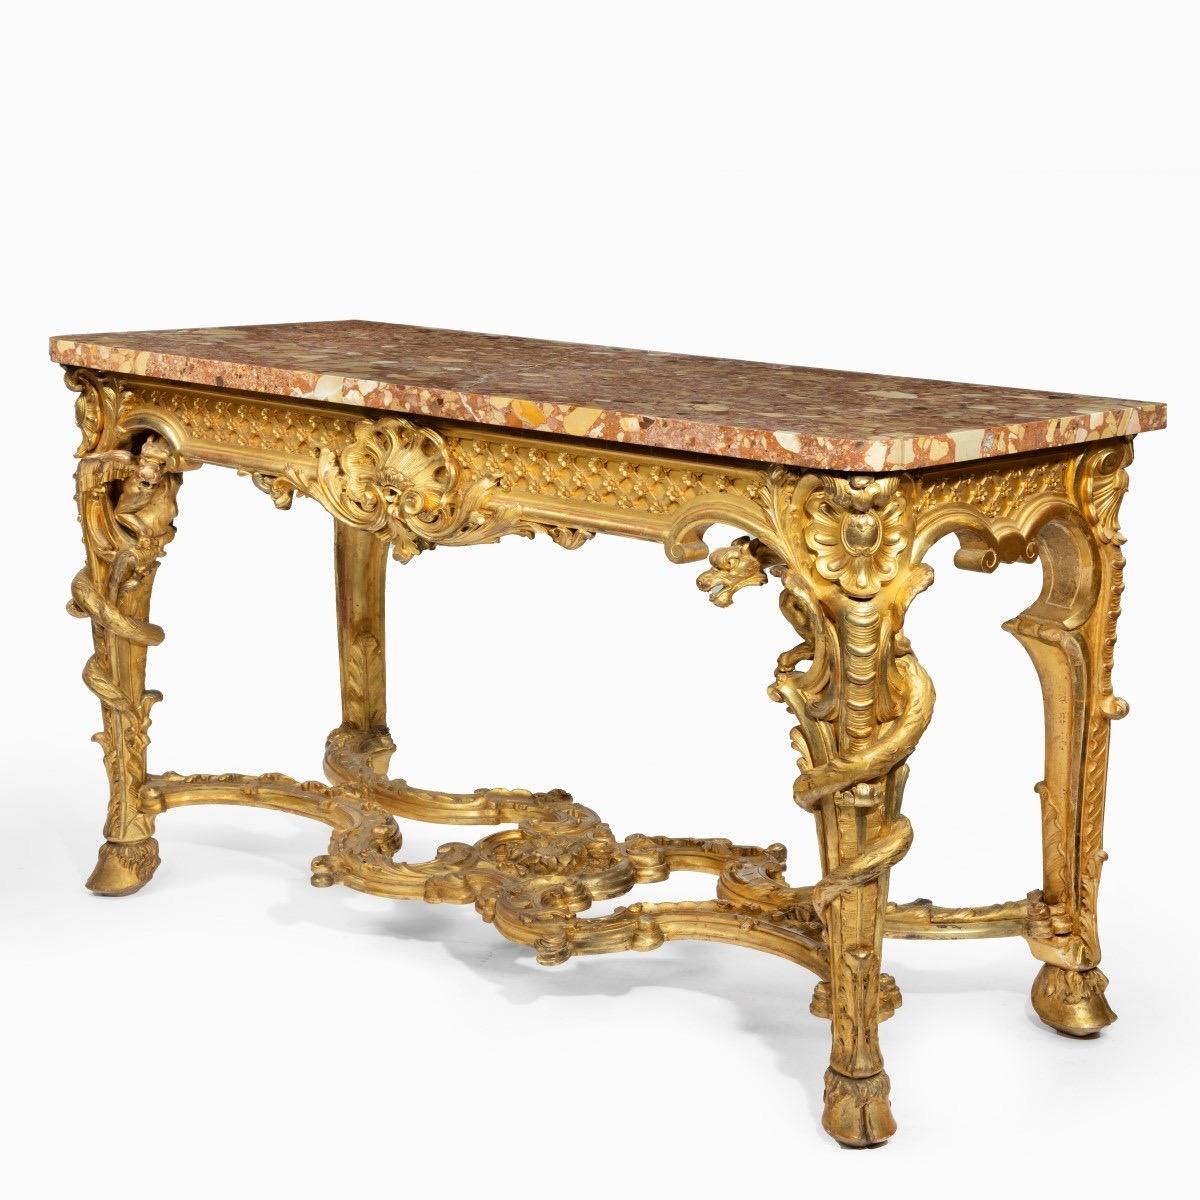 A superb pair of giltwood console tables with original marble tops